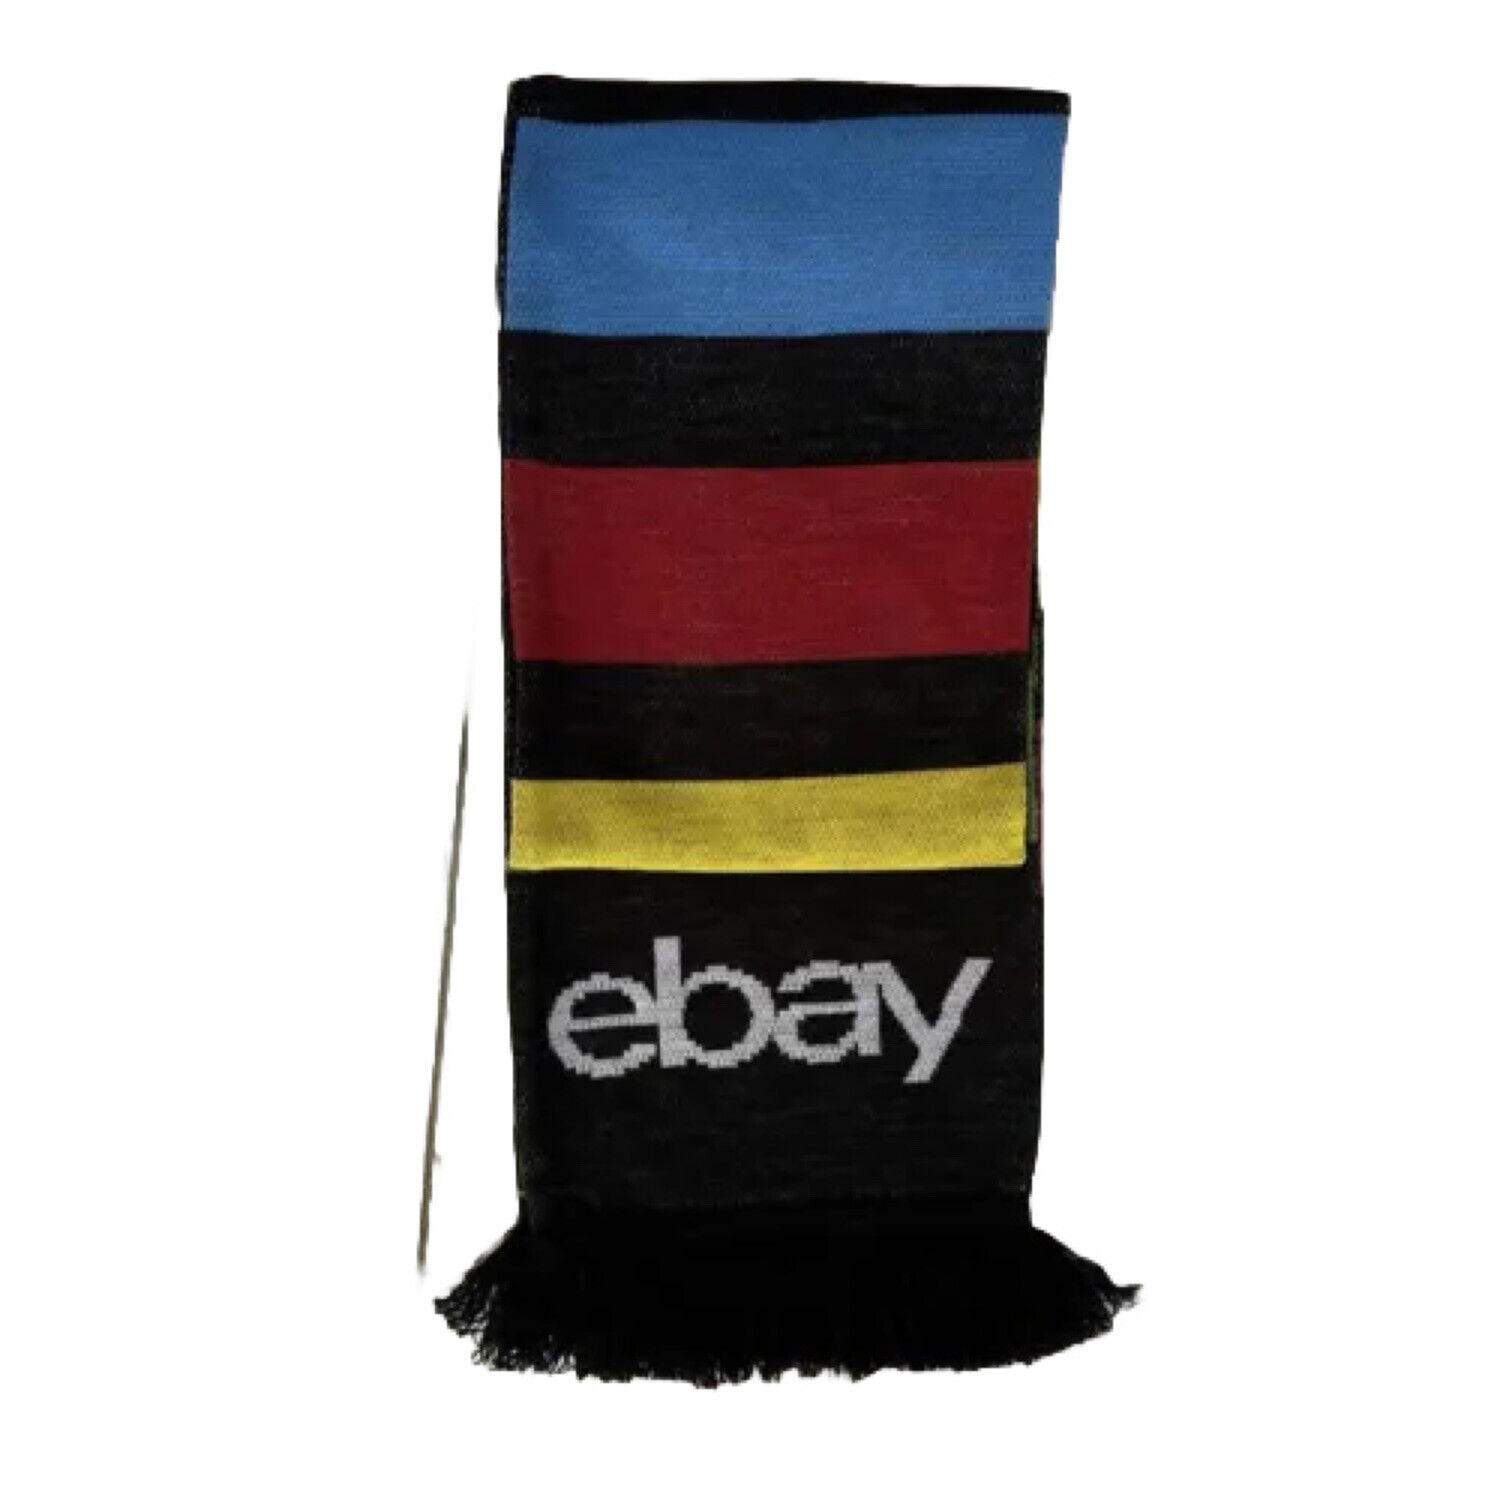 Ebay Open 2023 Scarf Black With Color Logo Fringe 63x8 Inches Long New With Tags